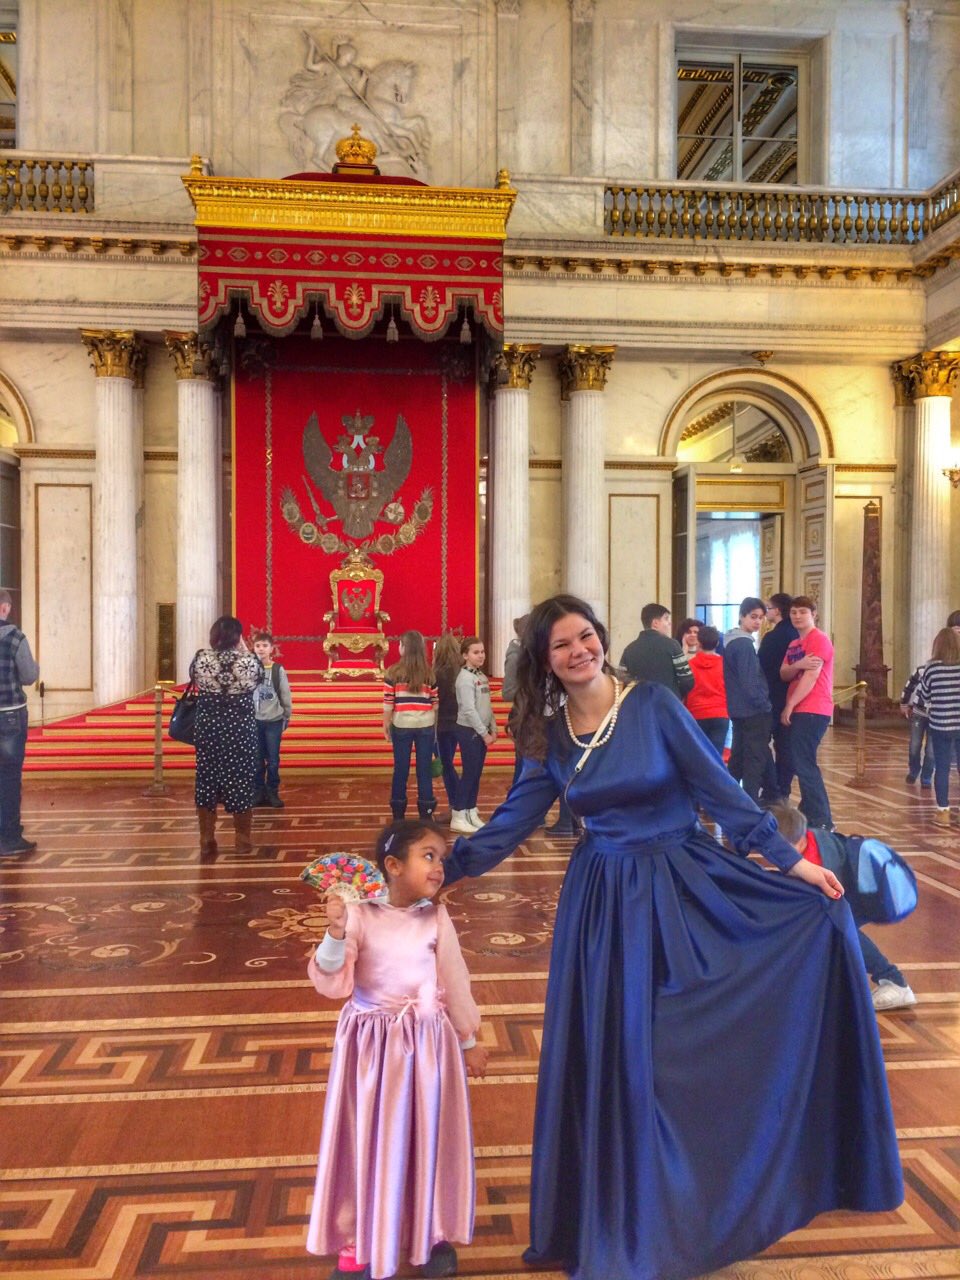 St Petersburg Russia tours: Our guide Christina with a young princess on a children's...